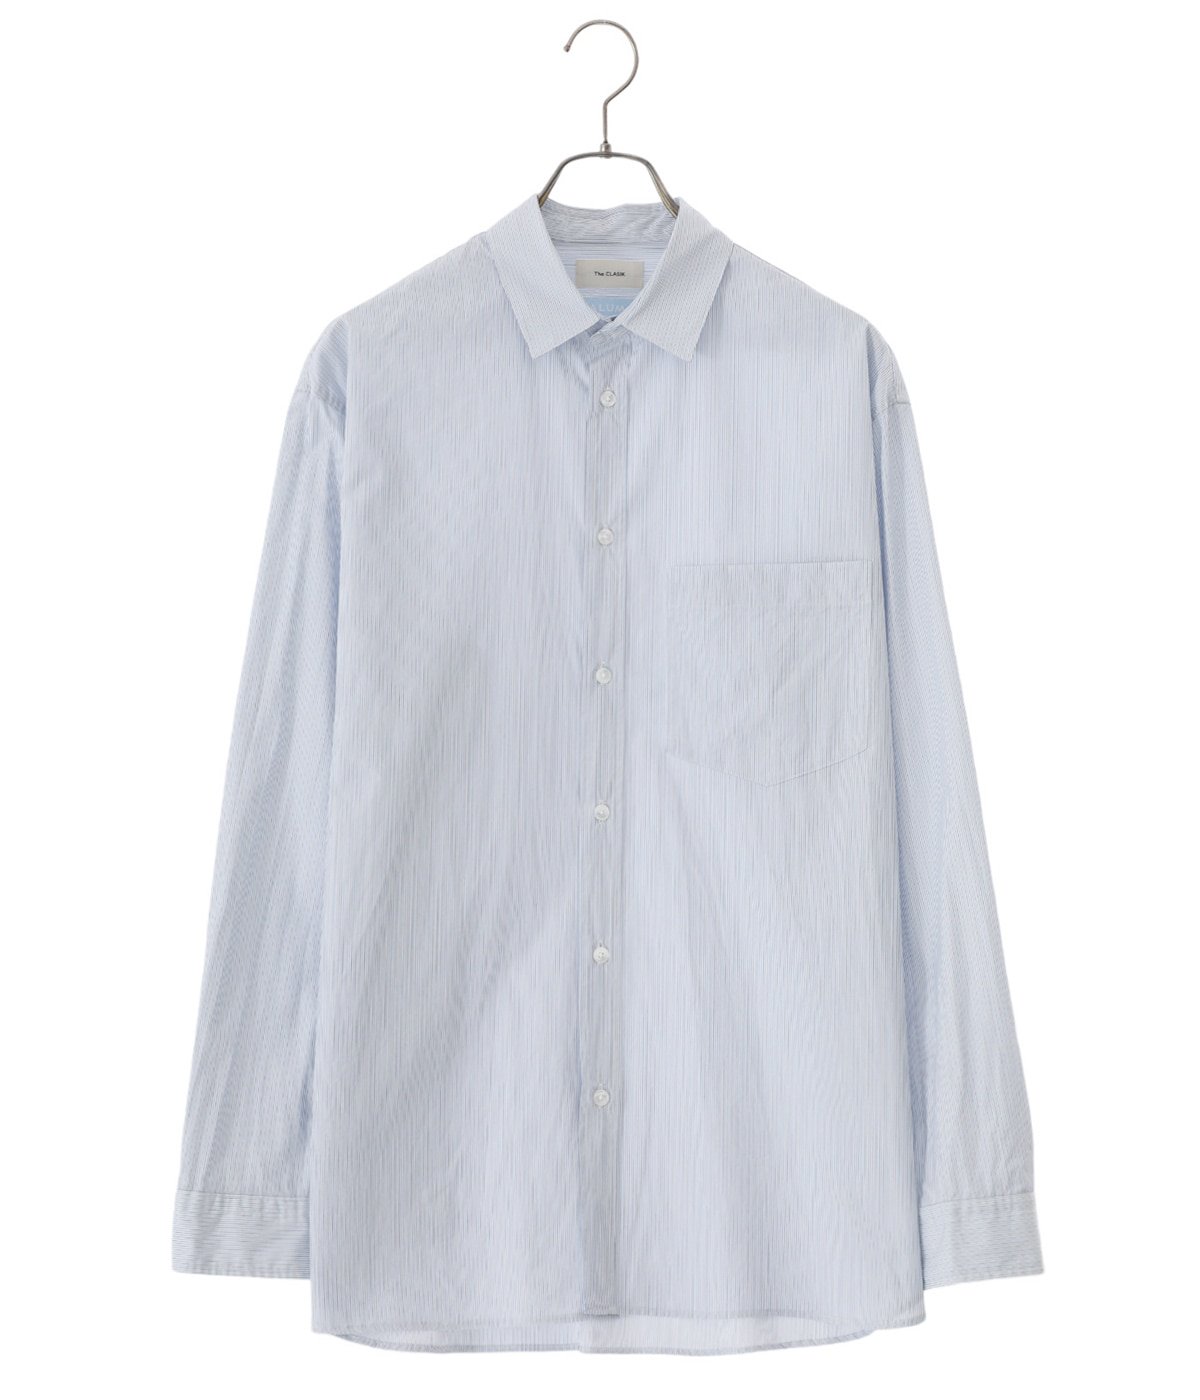 CLASSIC SHIRT(RELAX FIT) | The CLASIK(ザ クラシック) / トップス 長袖シャツ (メンズ)の通販 -  ARKnets(アークネッツ) 公式通販 【正規取扱店】